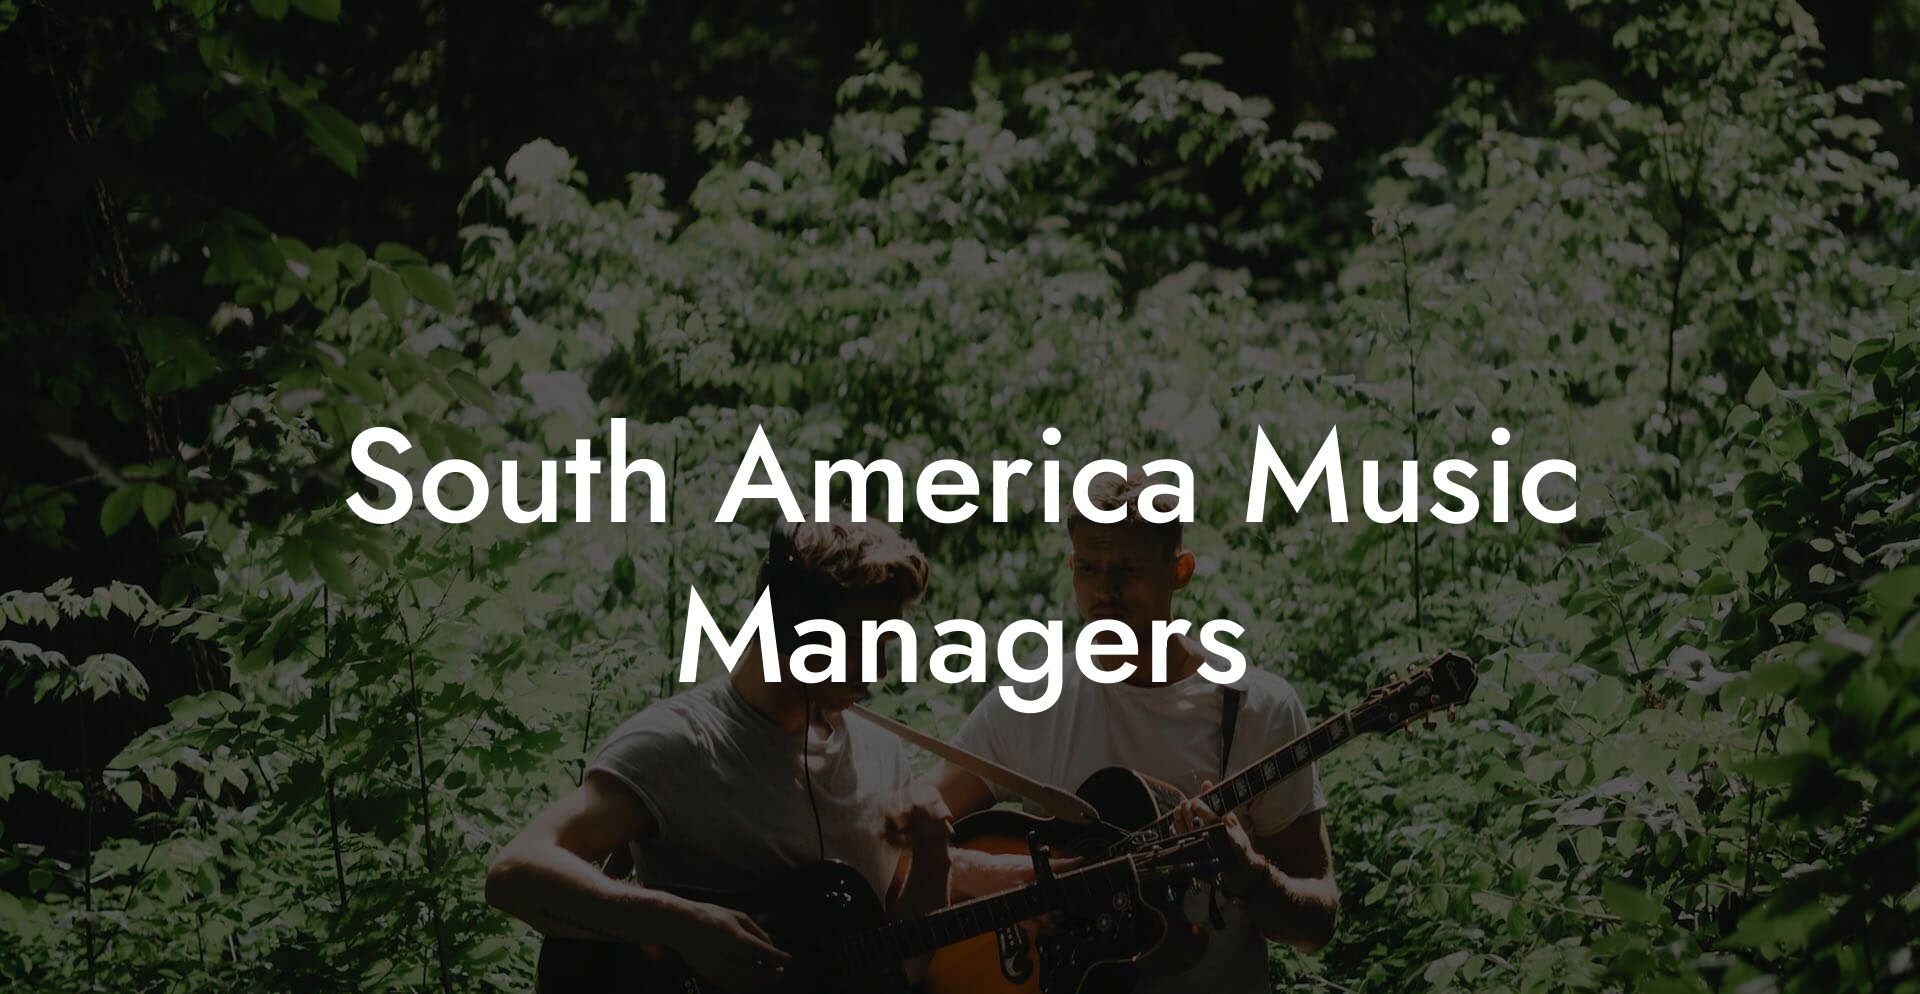 South America Music Managers